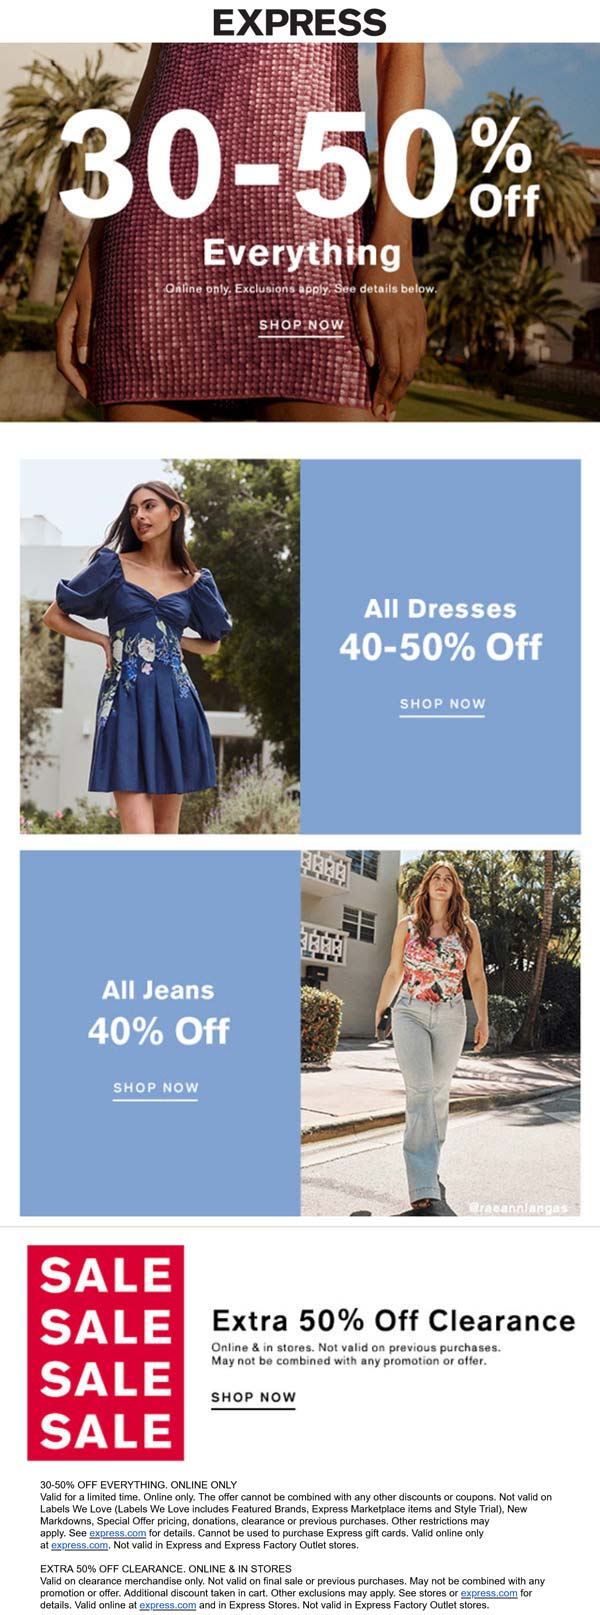 Express stores Coupon  30-50% off everything online at Express #express 